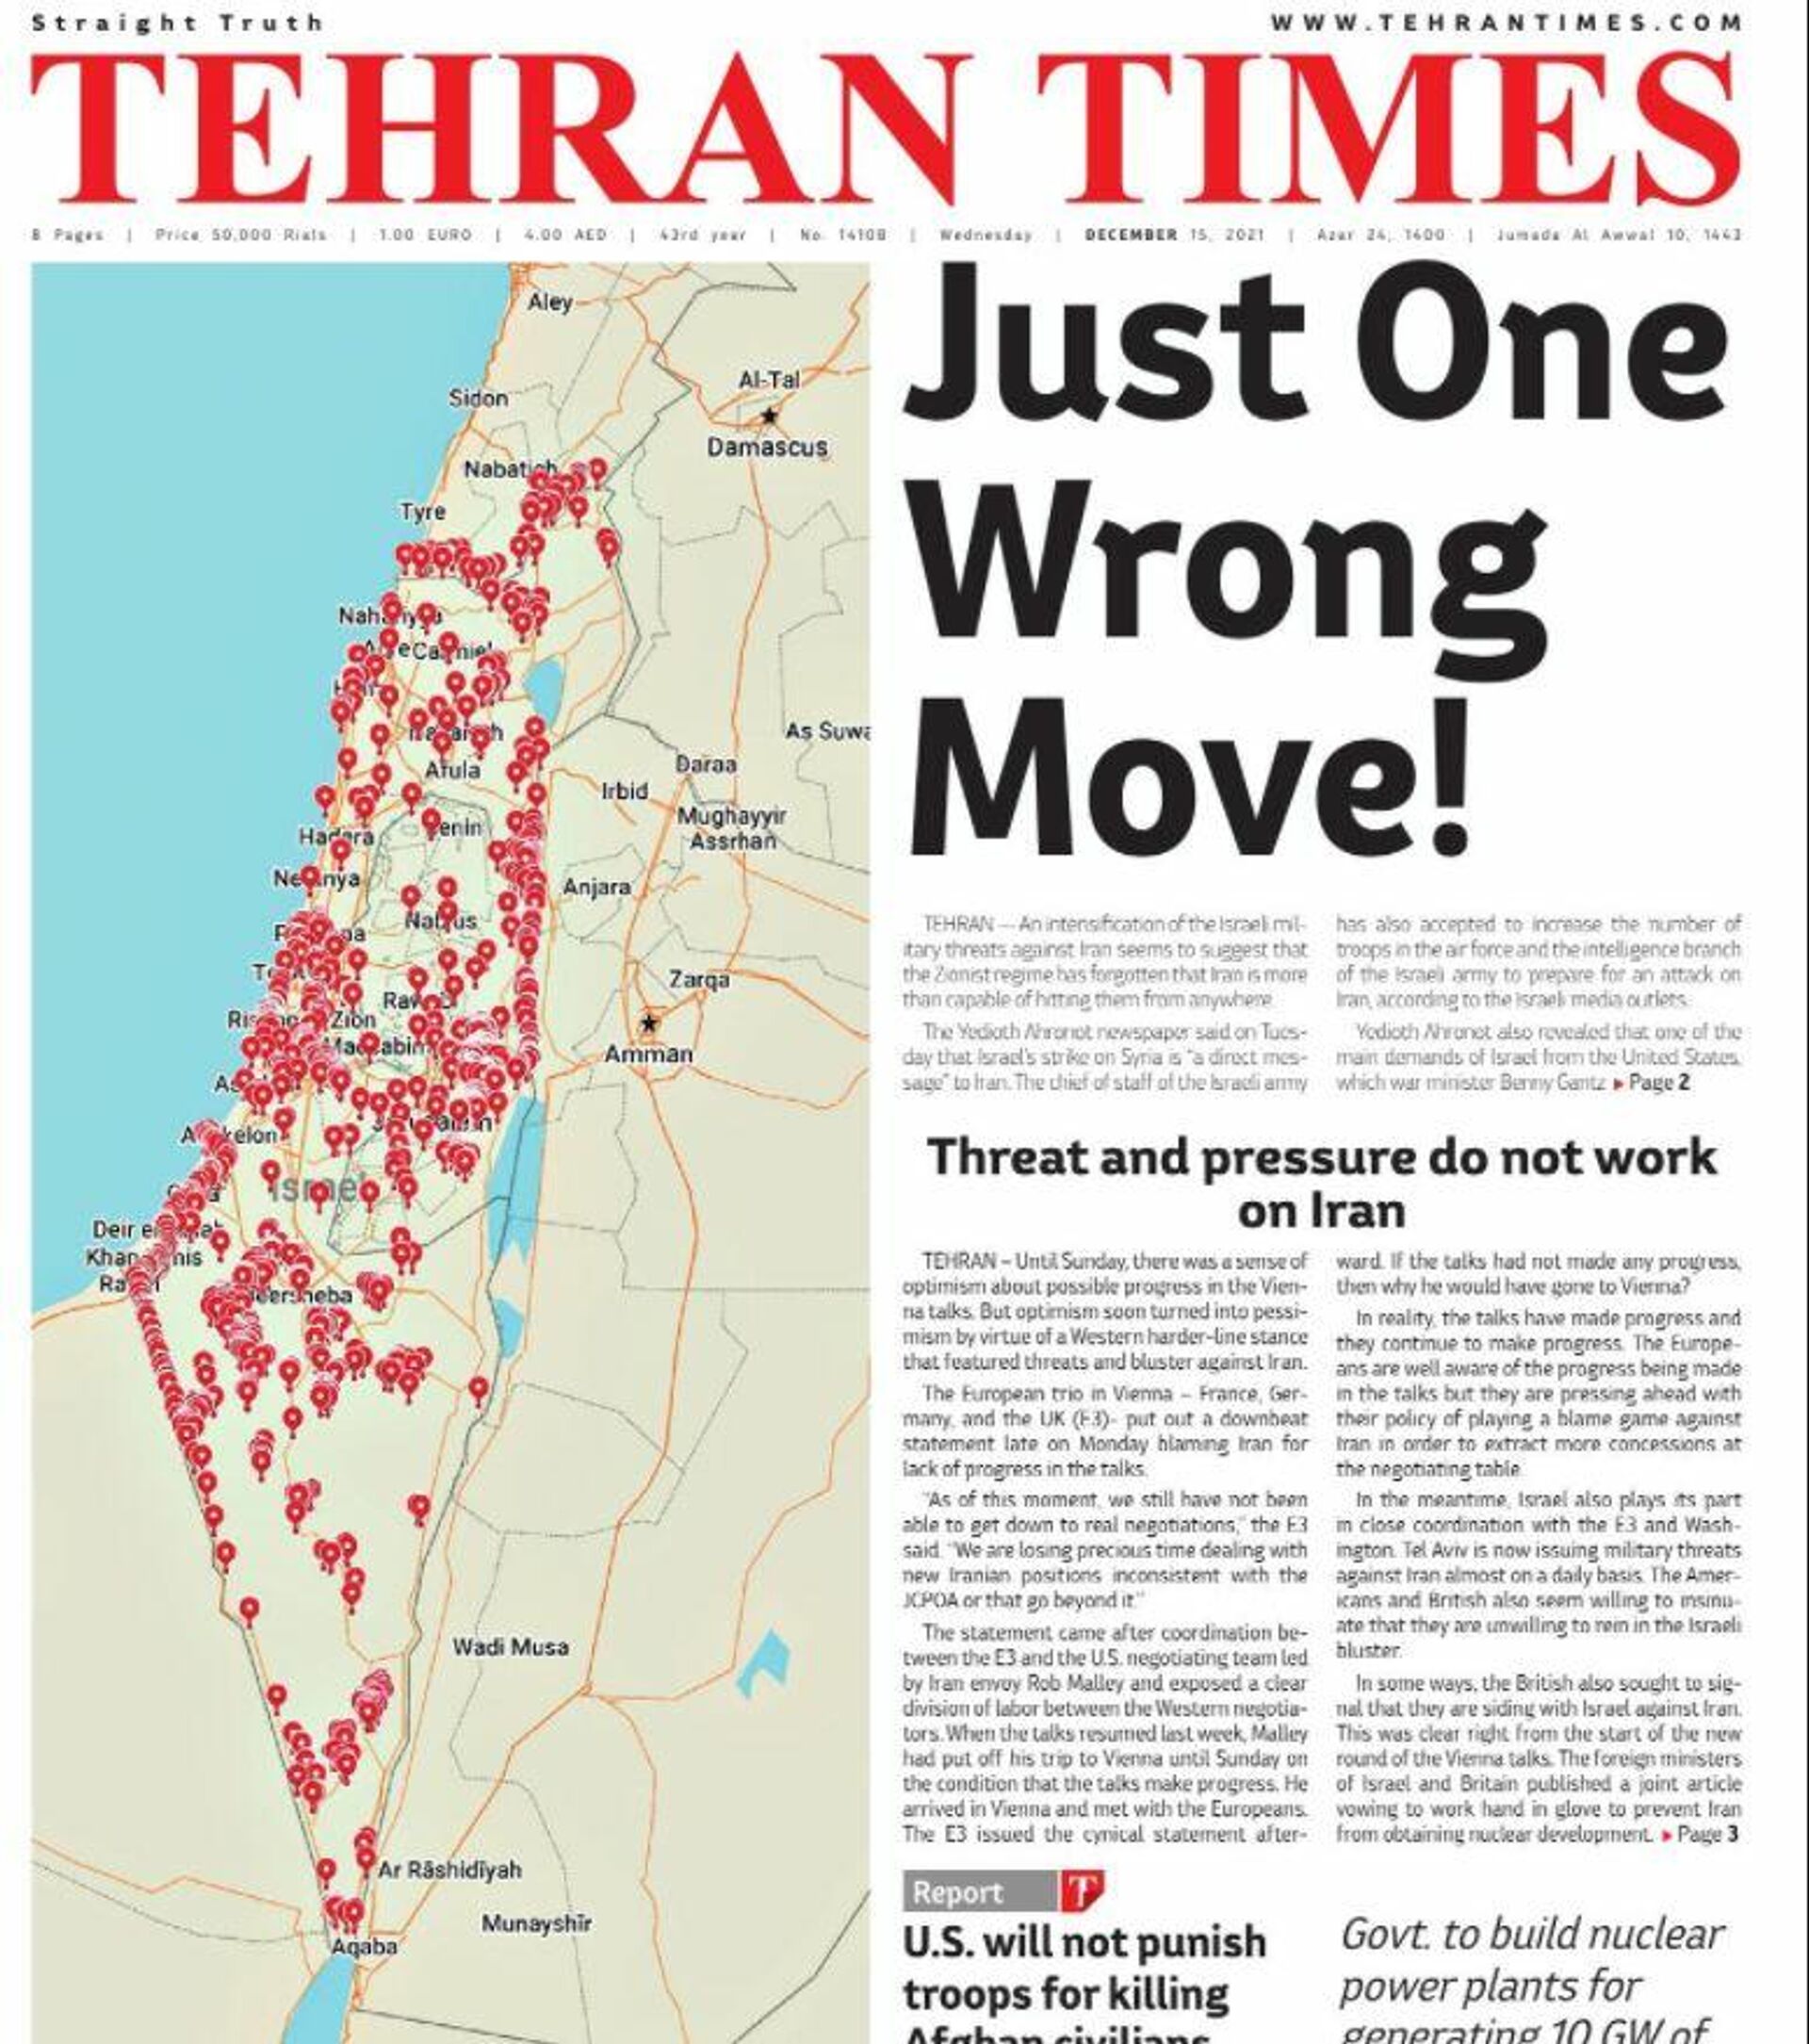 Screengrab ofTehran Times' front page of the 14108 issue from 15 December, 2021 - Sputnik International, 1920, 15.12.2021